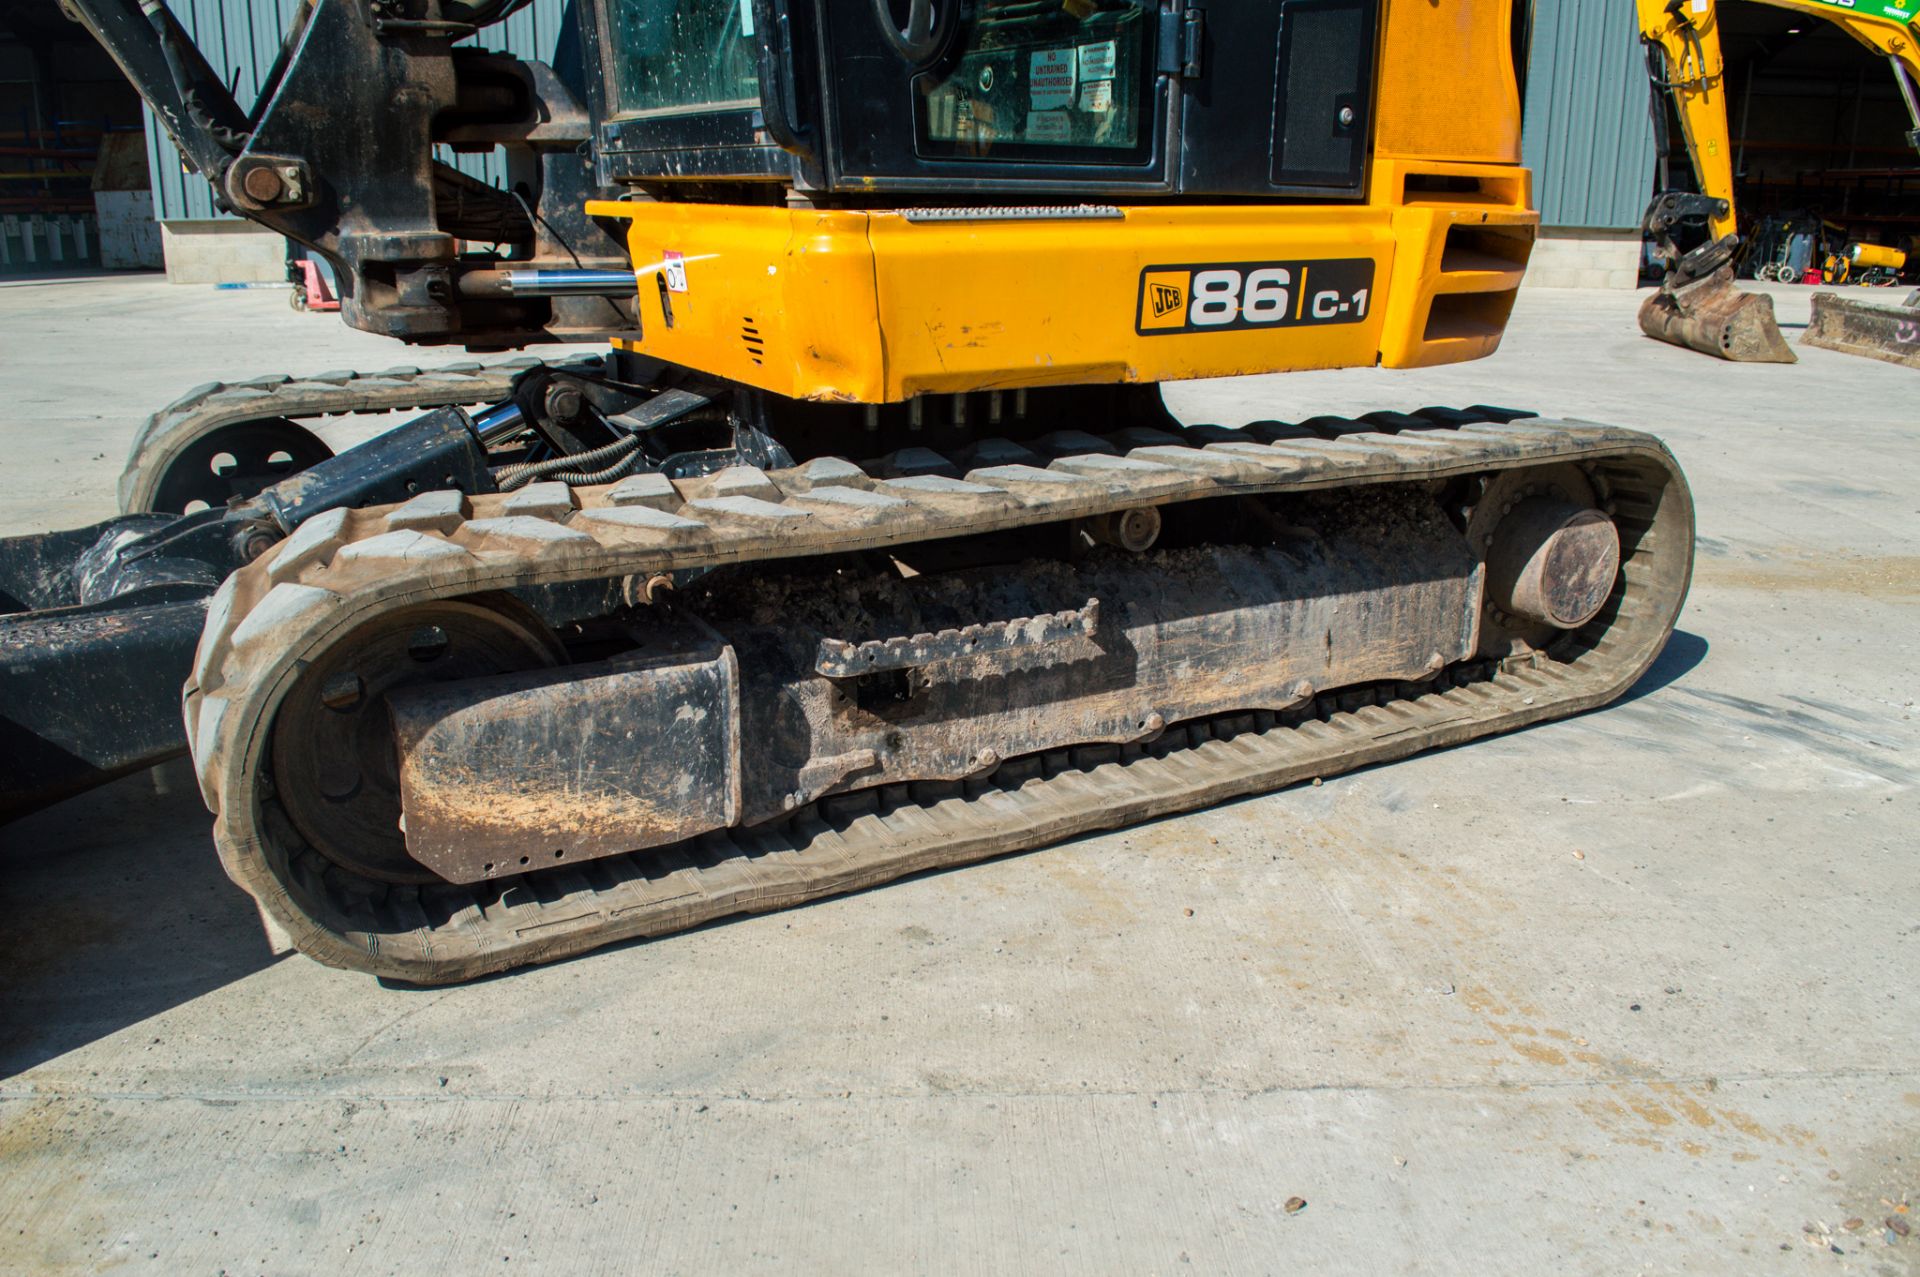 JCB 86c-1 8.6 tonne rubber tracked midi excavator Year: 2014 S/N: 249717 Recorded Hours: 3064 piped, - Image 10 of 21